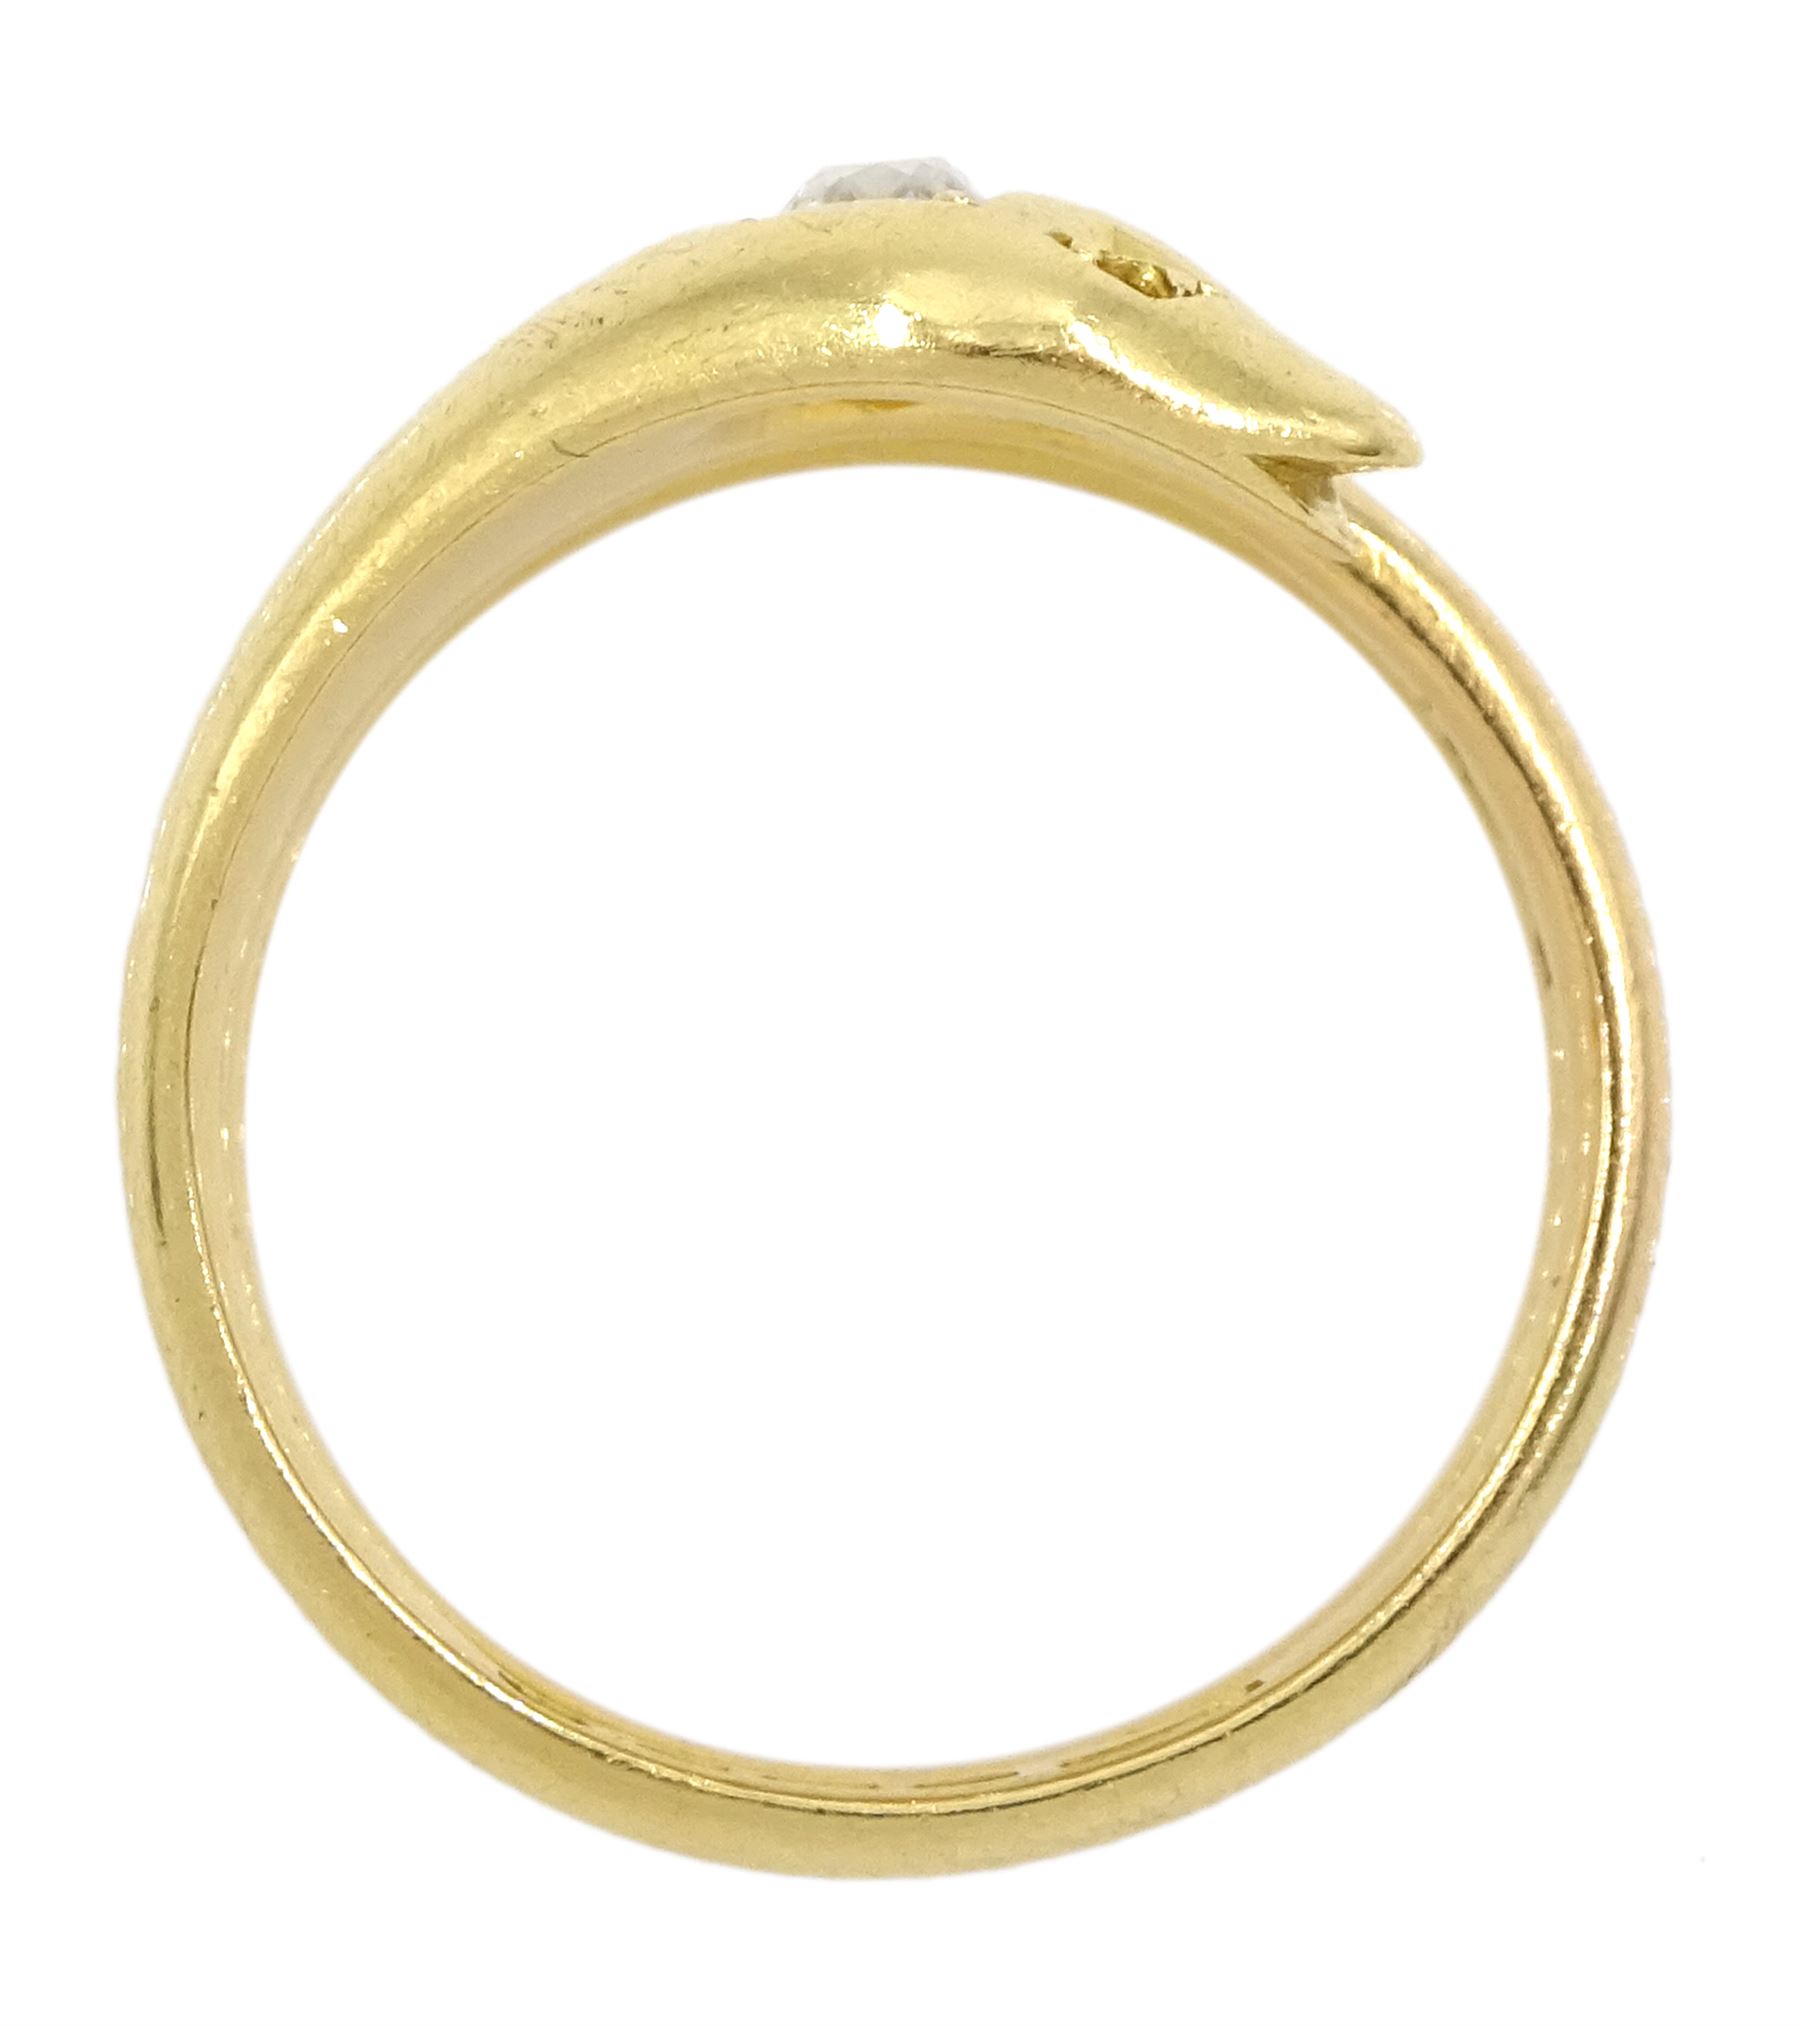 Early 20th century 18ct gold coiled snake ring - Image 5 of 5